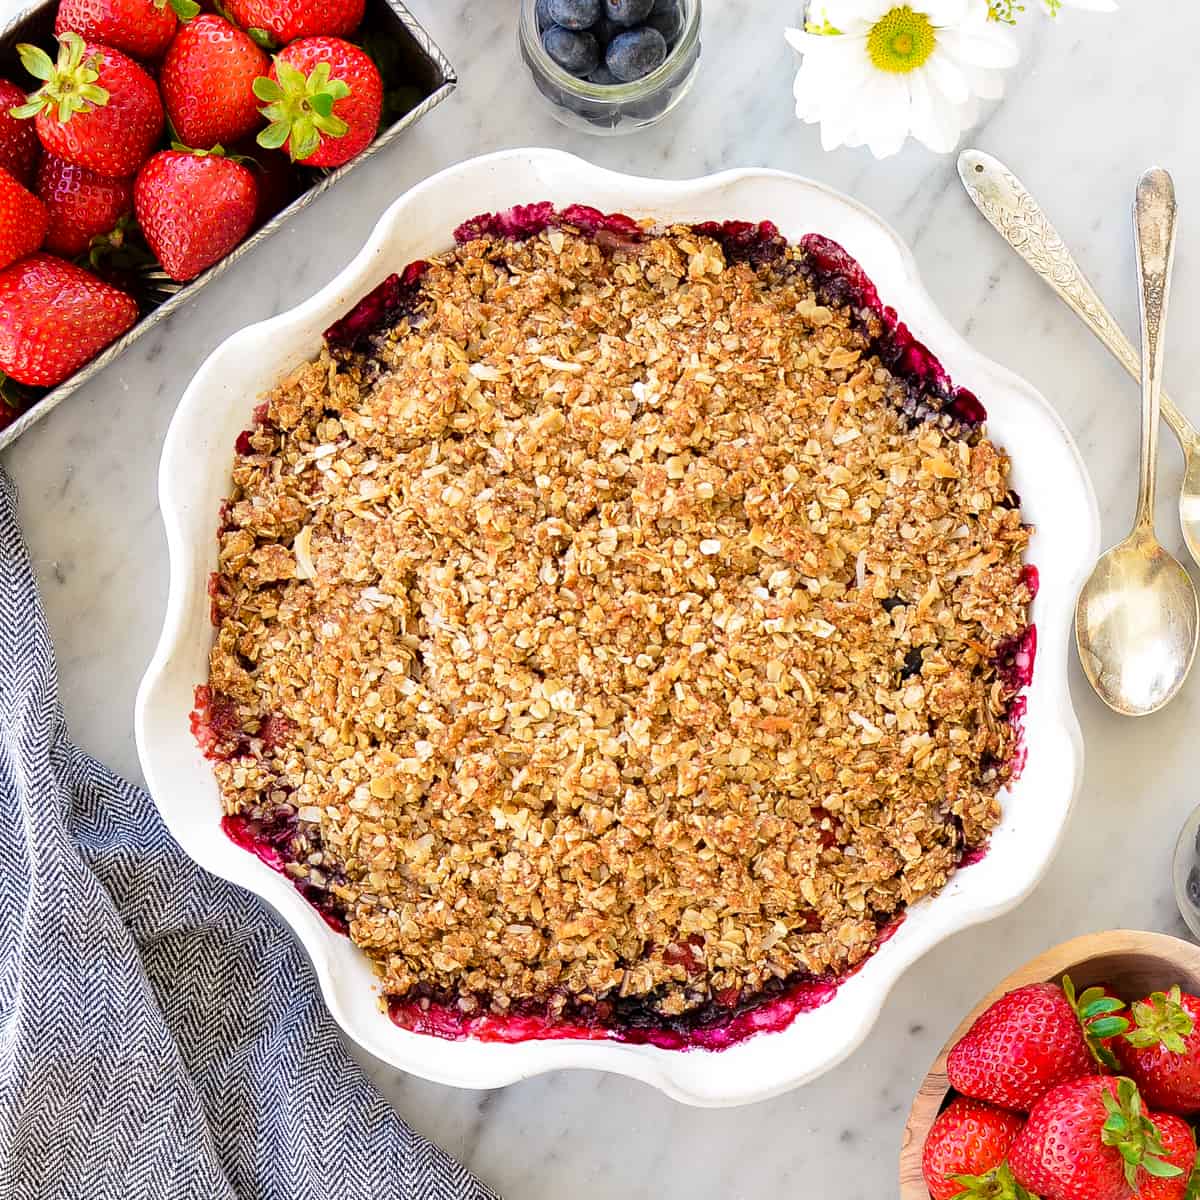 Overhead view of Healthy Berry Crisp Recipe in a pie dish surrounded by berries